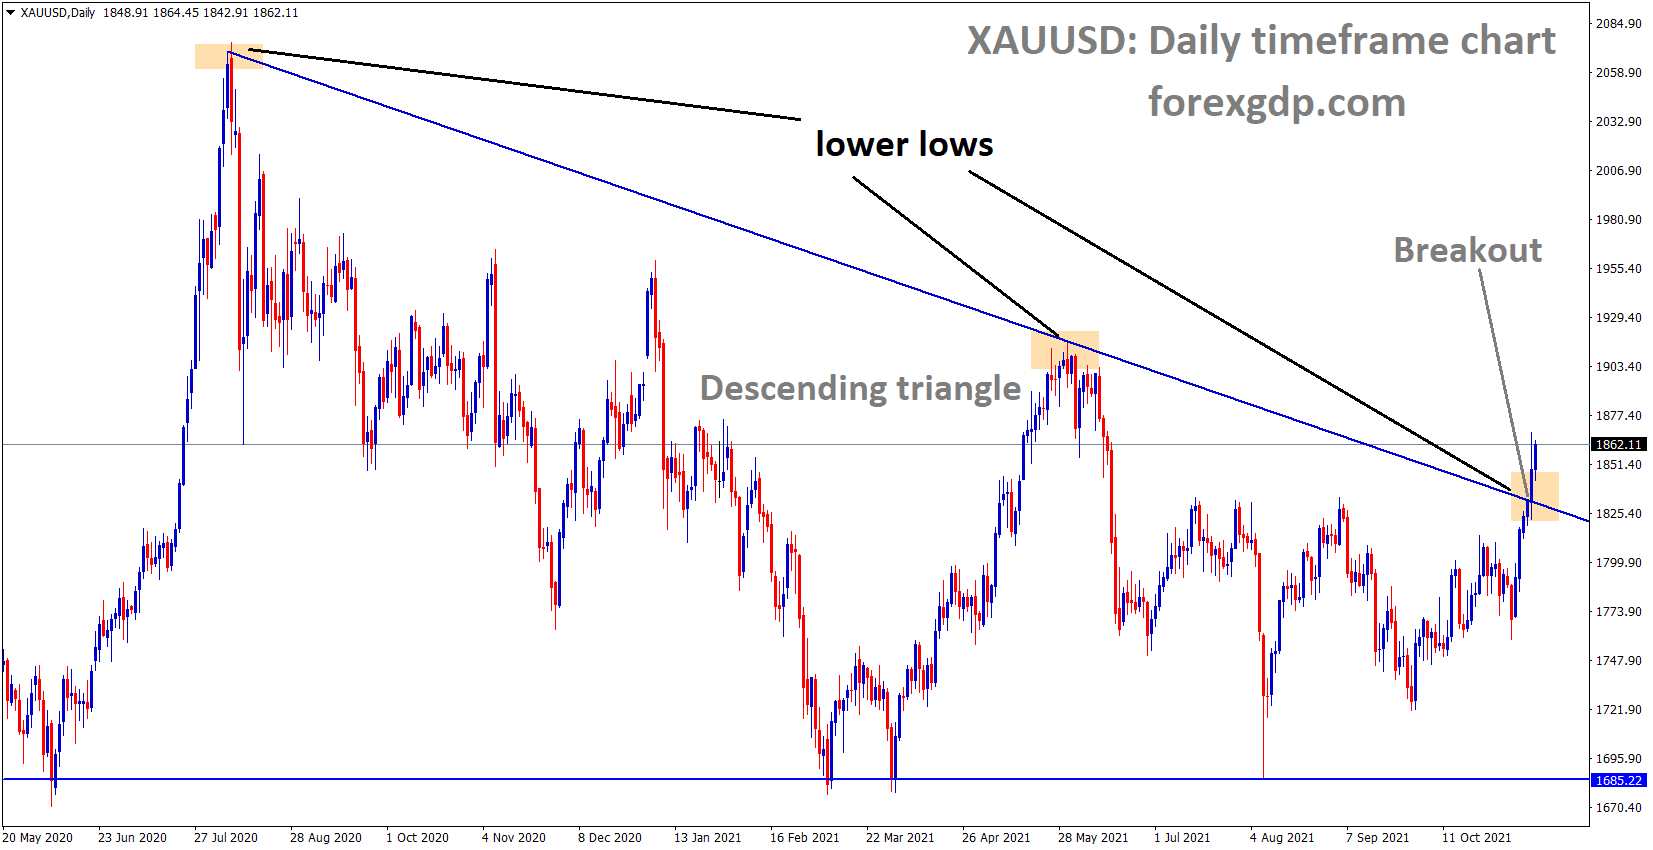 XAUUSD Gold price has broken the Descending triangle pattern after a long time.